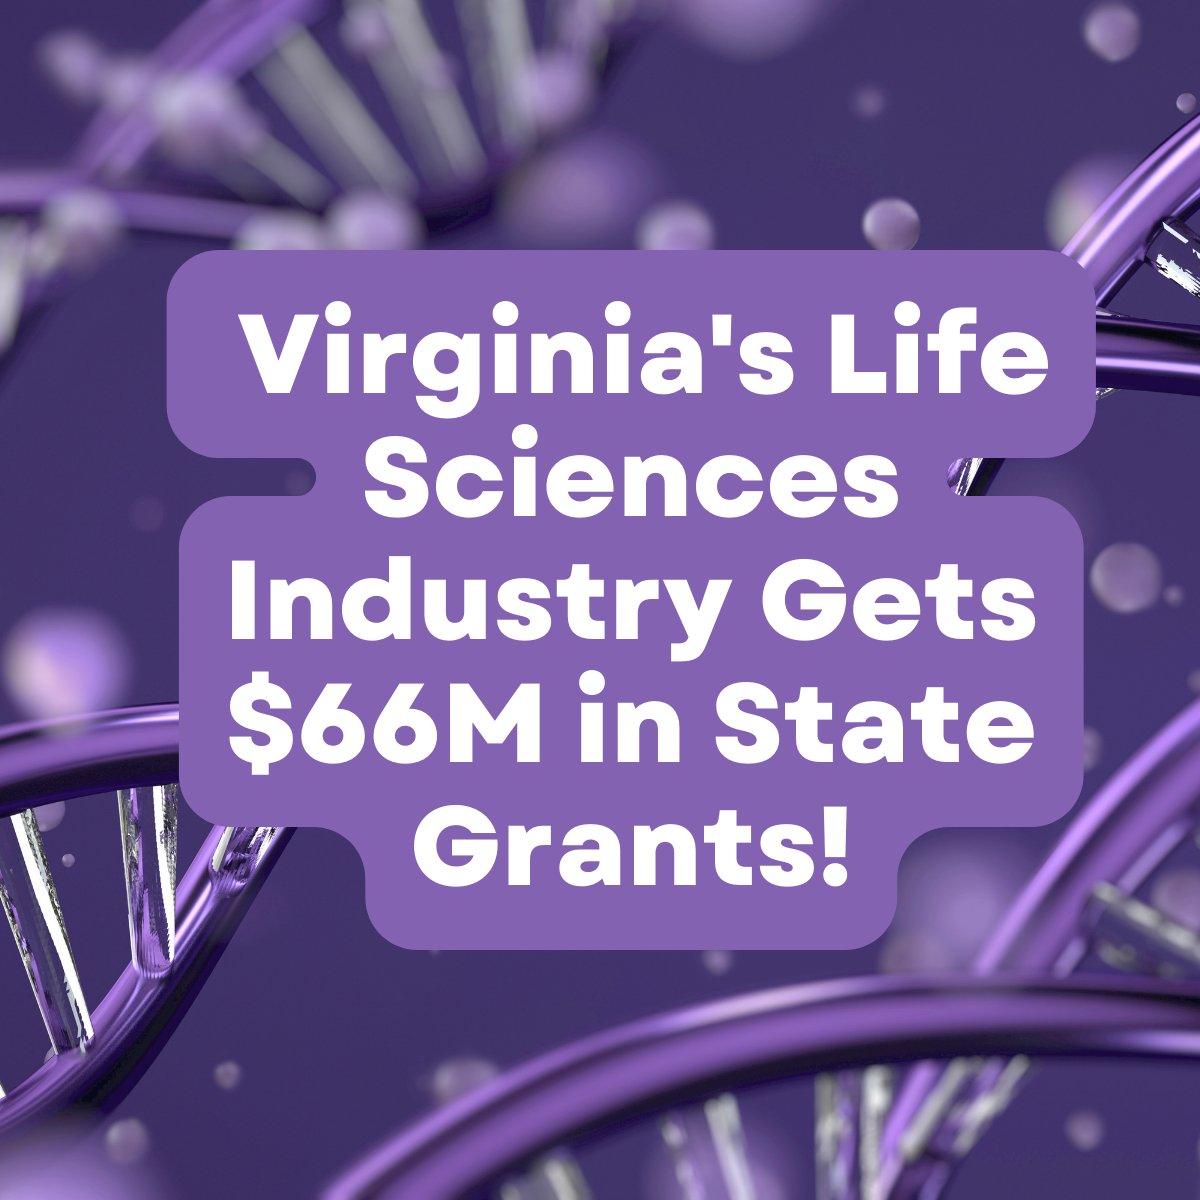 A big win for VA's life sciences industry! @GovernorVA announced $66.7 M in state grants! Congrats to all recipients! More at ow.ly/nxtq50MSEIo @UVA @VTCRC @RBTechCouncil @VirginiaWestern @CarilionClinic @JNJInnovation @VCEngineering @allianceformed @activationRVA